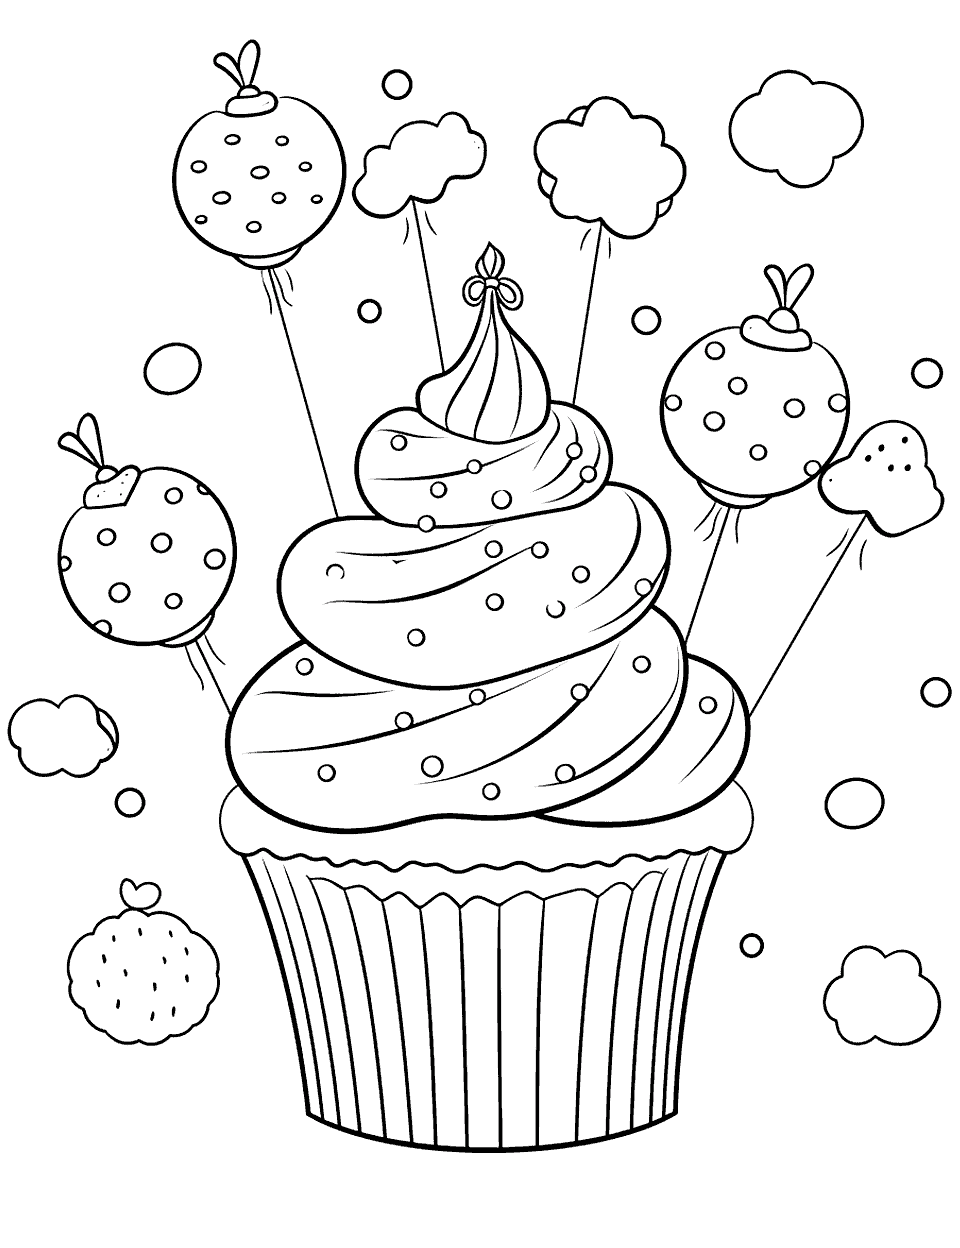 Cupcake and Balloons Coloring Page - A scene with a giant balloon cupcake getting carried by balloons in the sky.